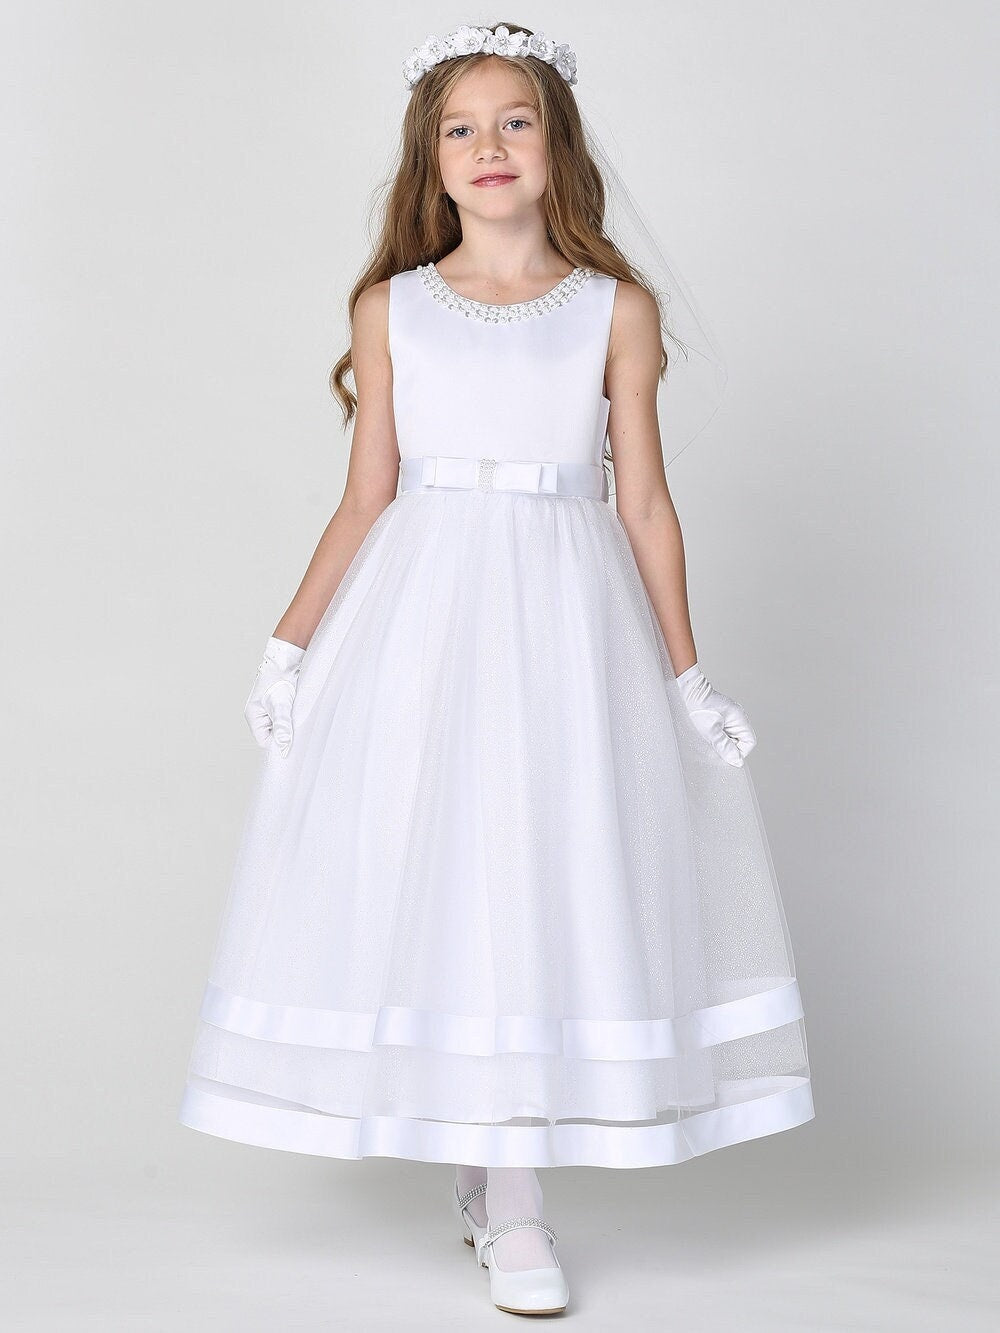 A girl wearing a graceful white First Communion Dress with a satin bodice and a glitter tulle skirt, adorned with a satin bow at the waist.